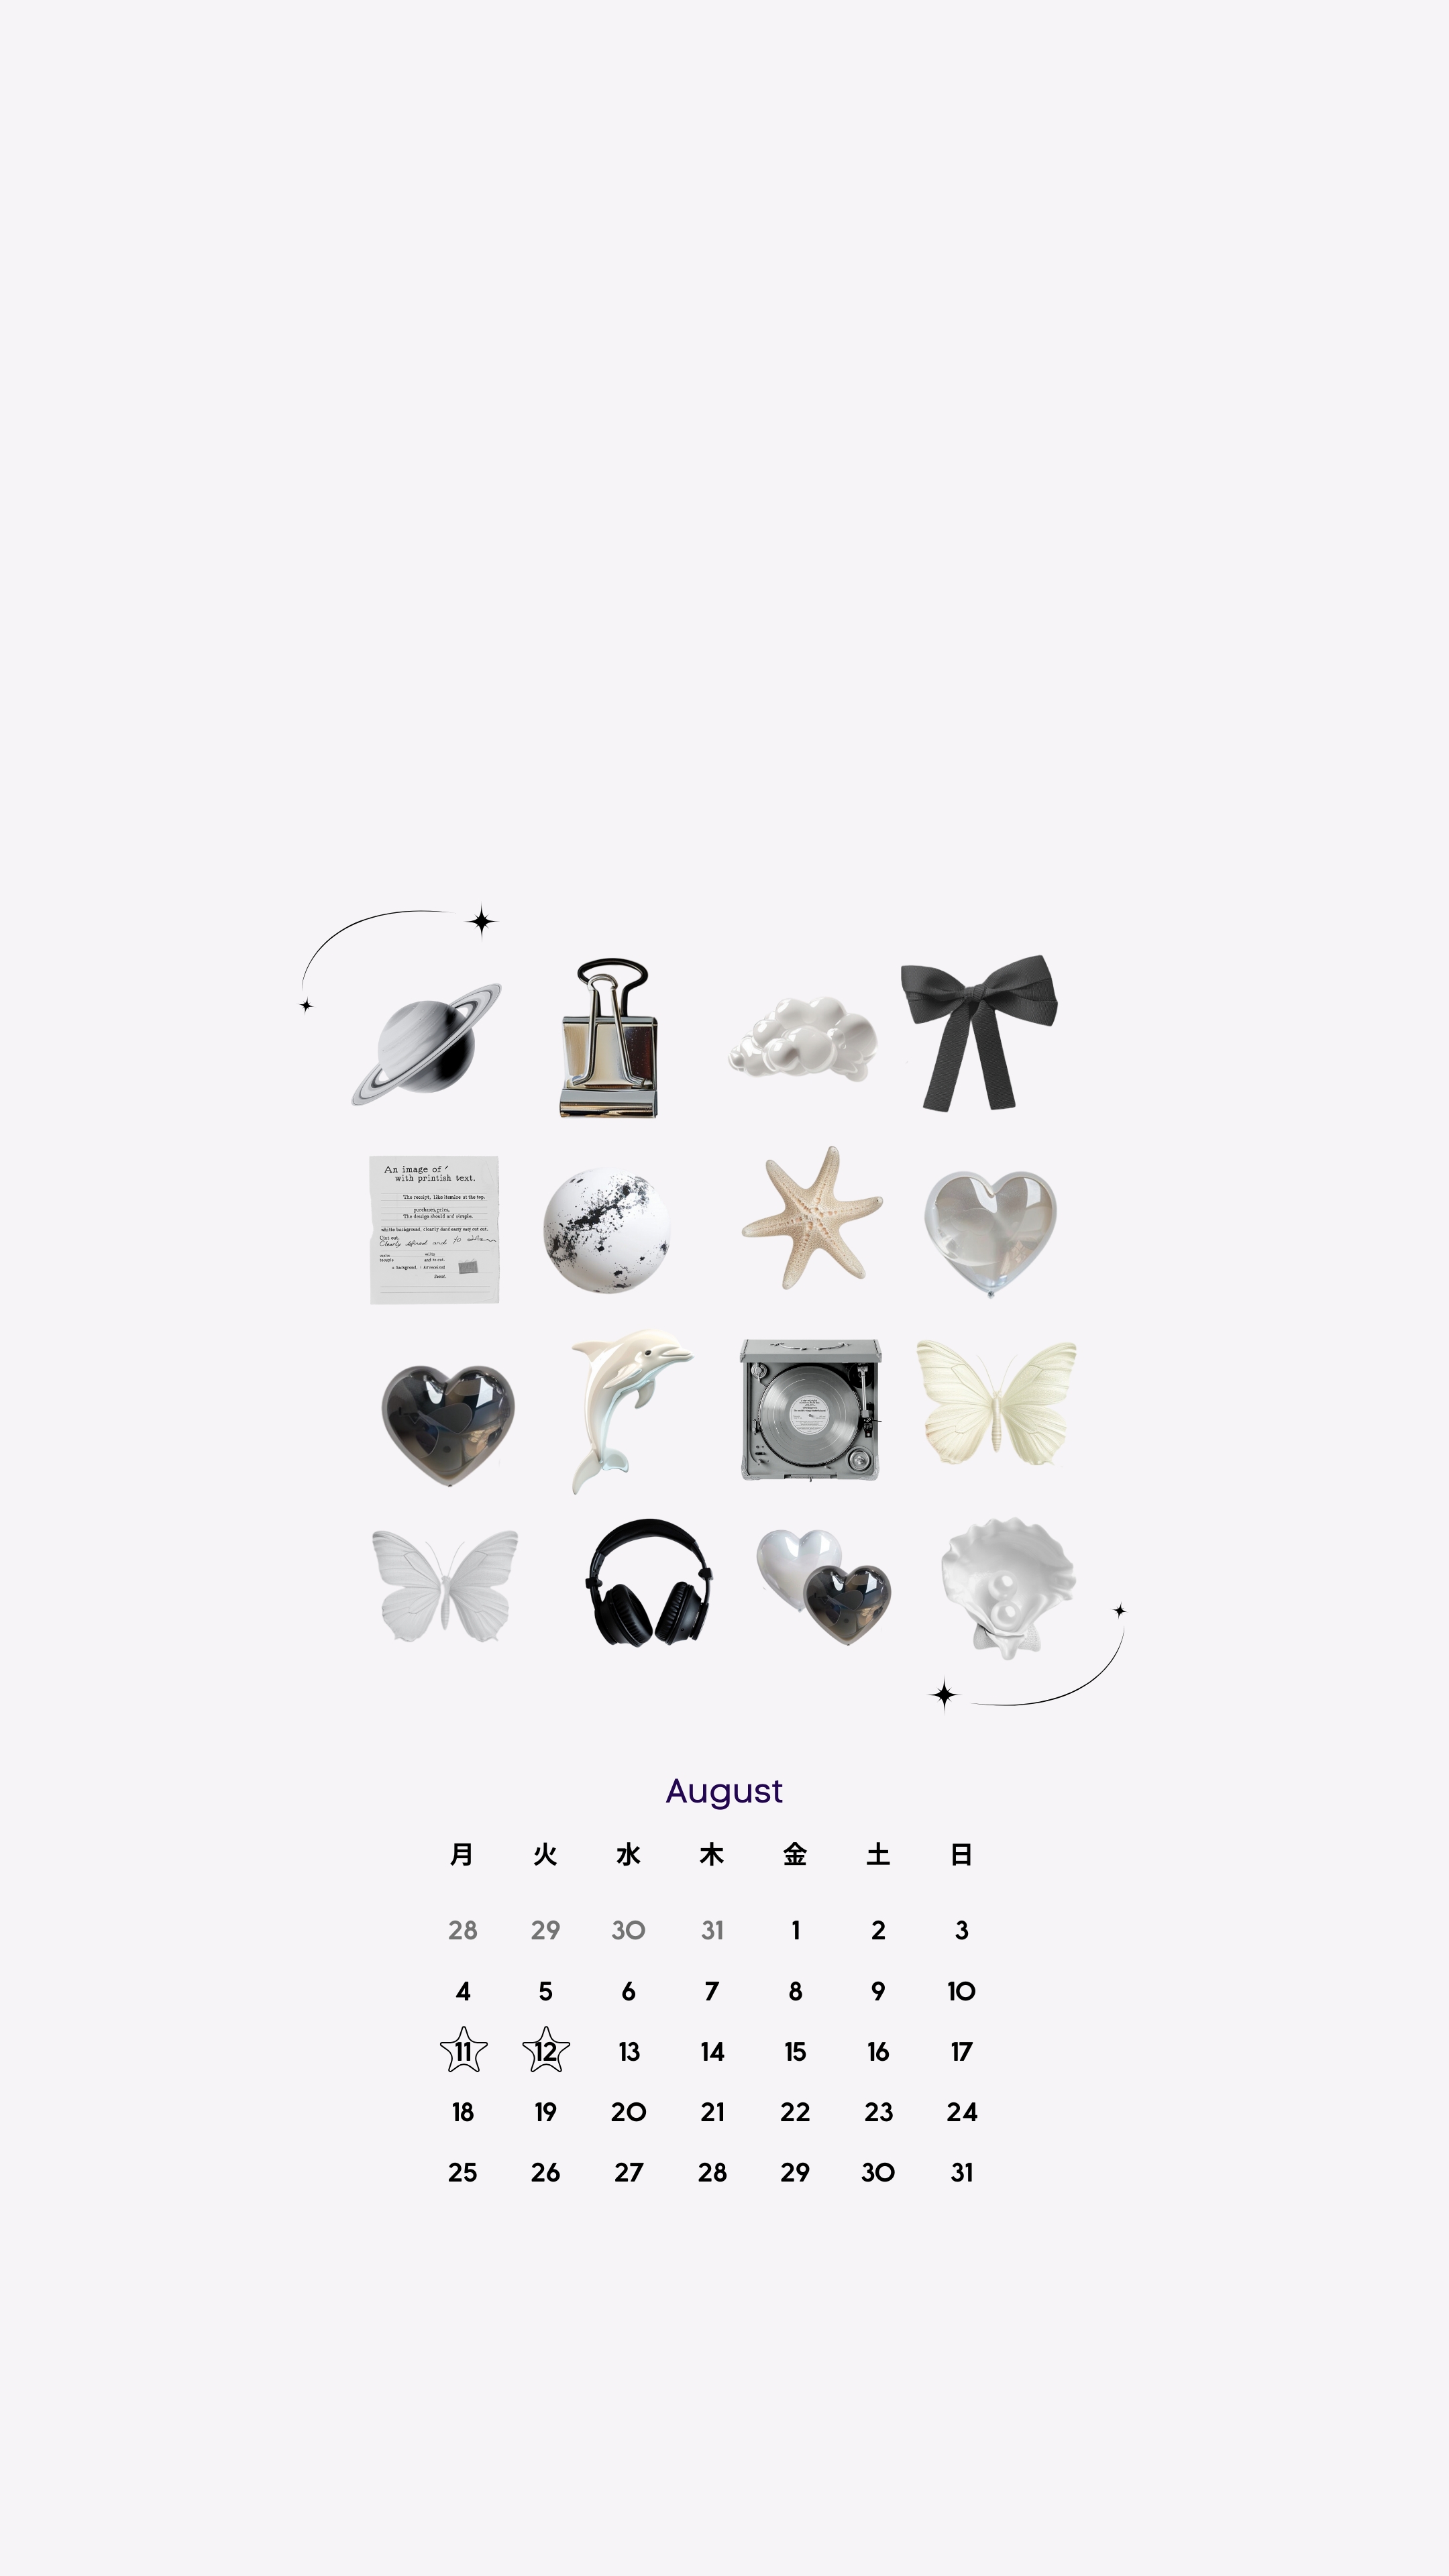 Simple and Elegant August Icons Design Wallpaper[8a6faff9cb2649288108]